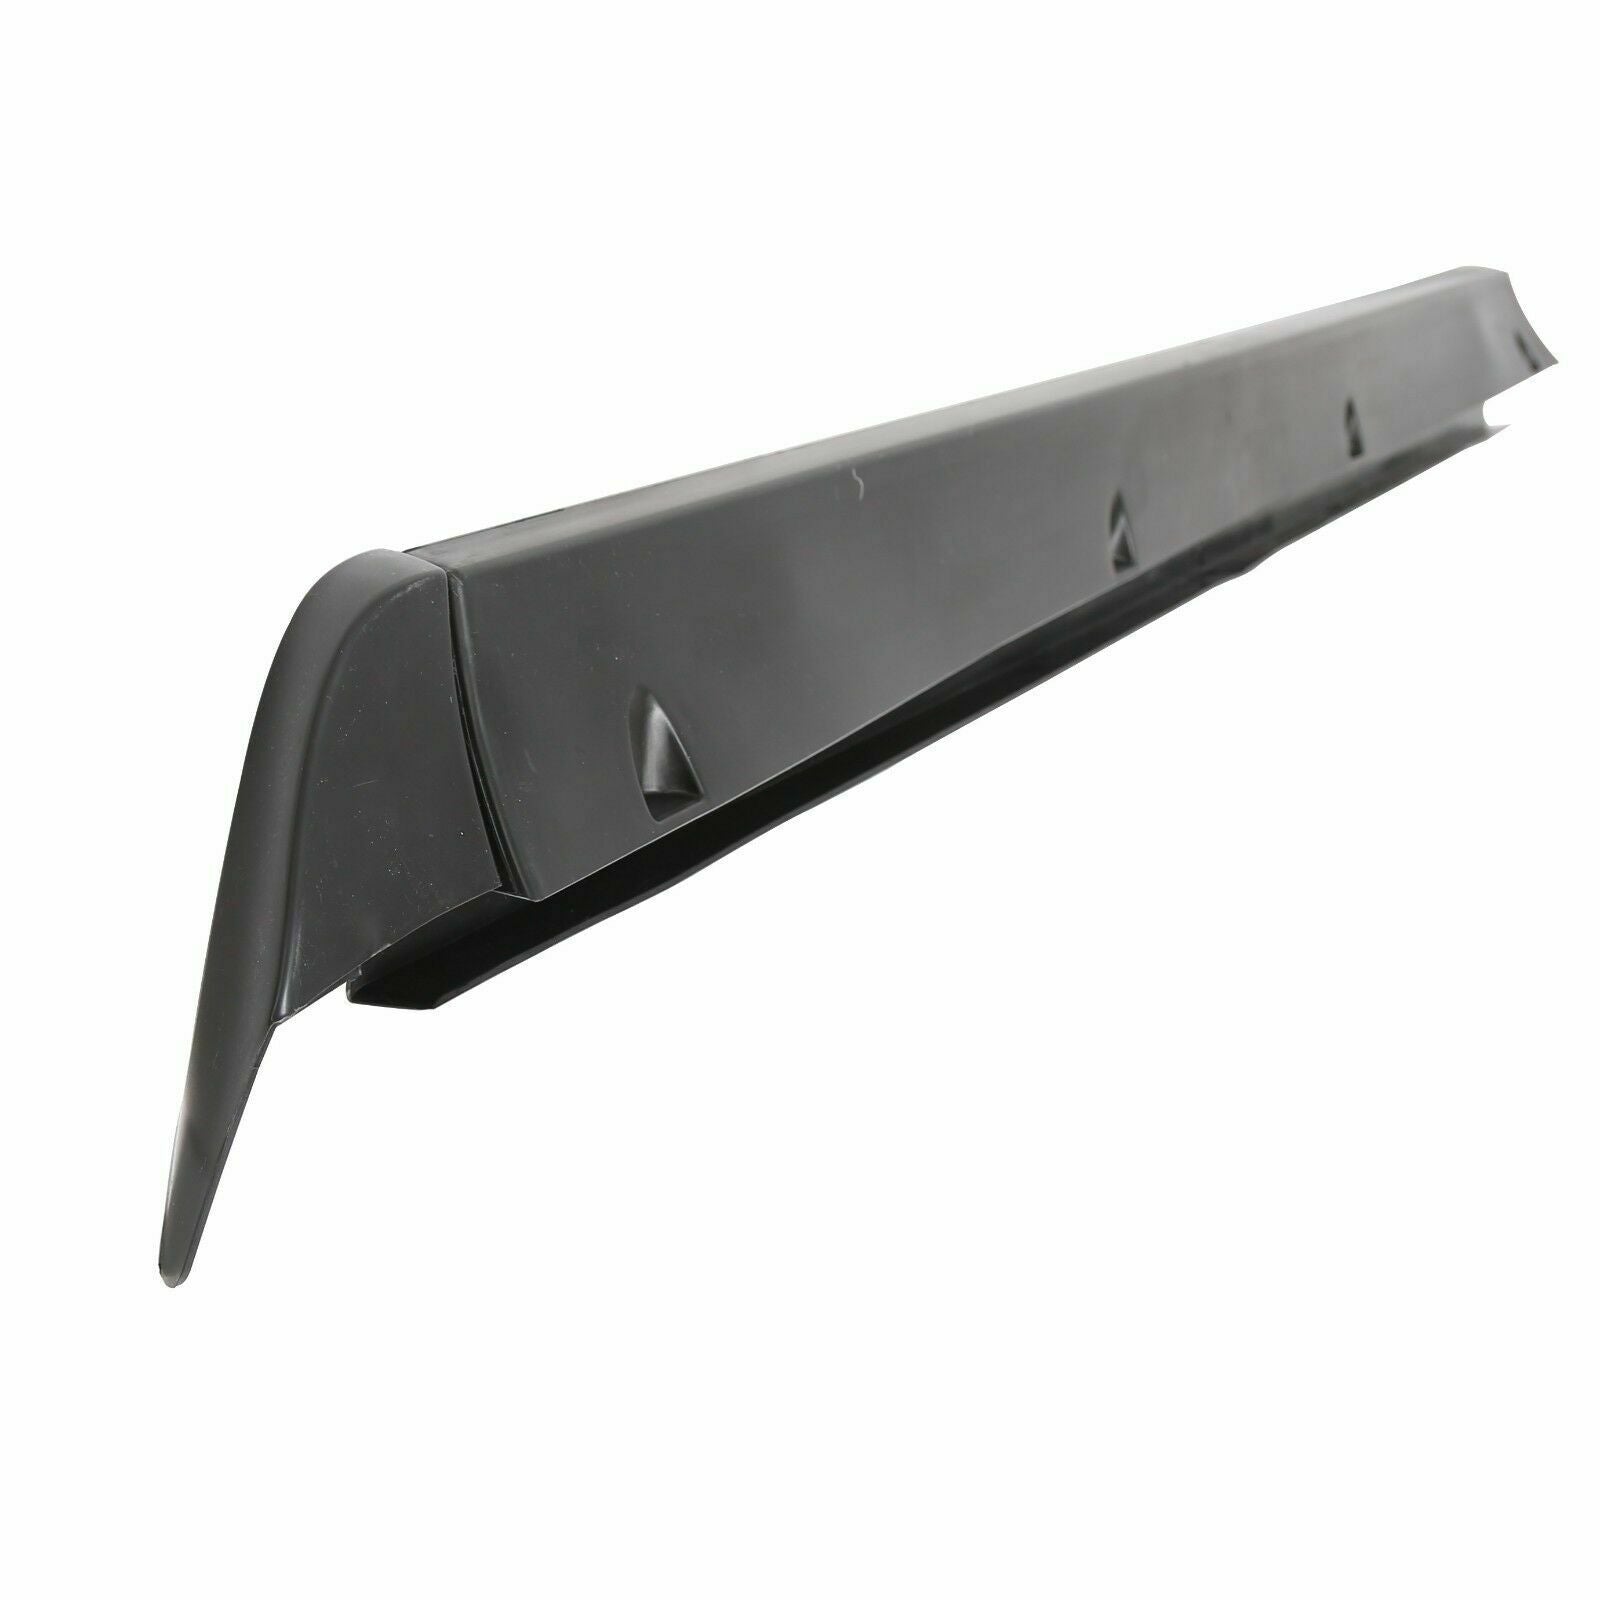 Car And Truck Exterior Parts Car And Truck Spoilers And Wings For 99 06 Chevy